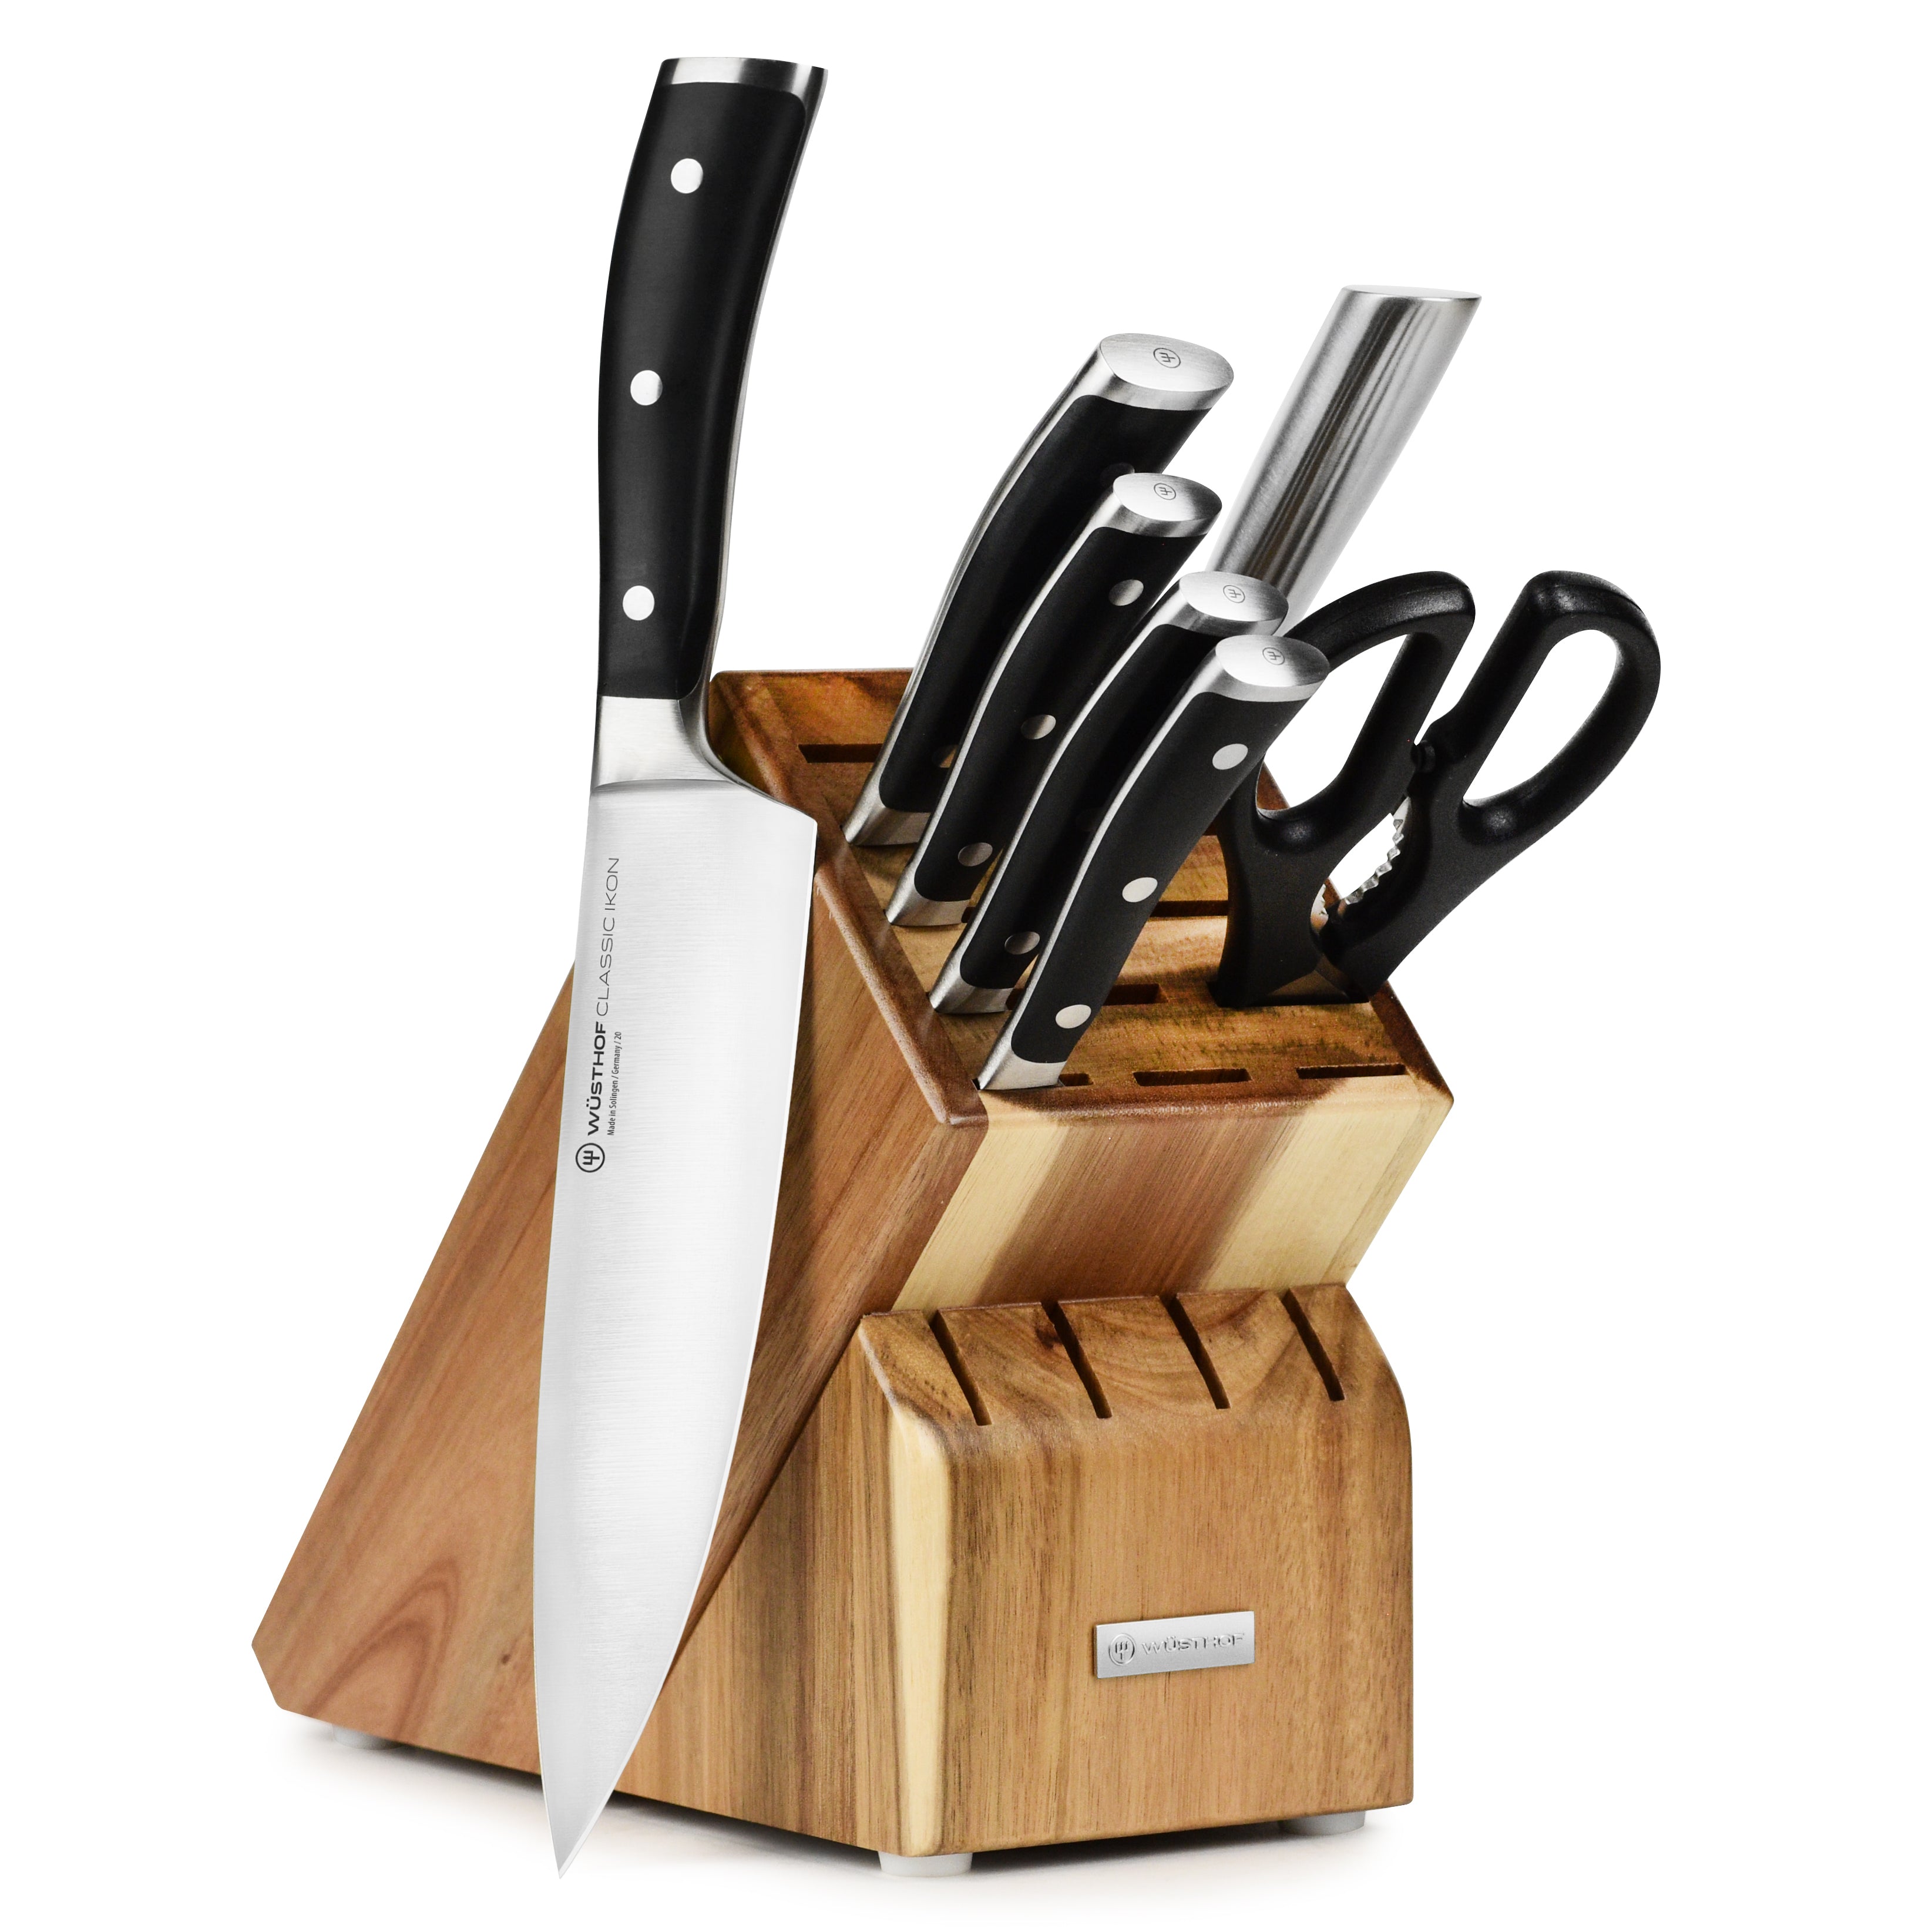 Wusthof Classic 8-Piece Knife Set with Block - Trademark Retail